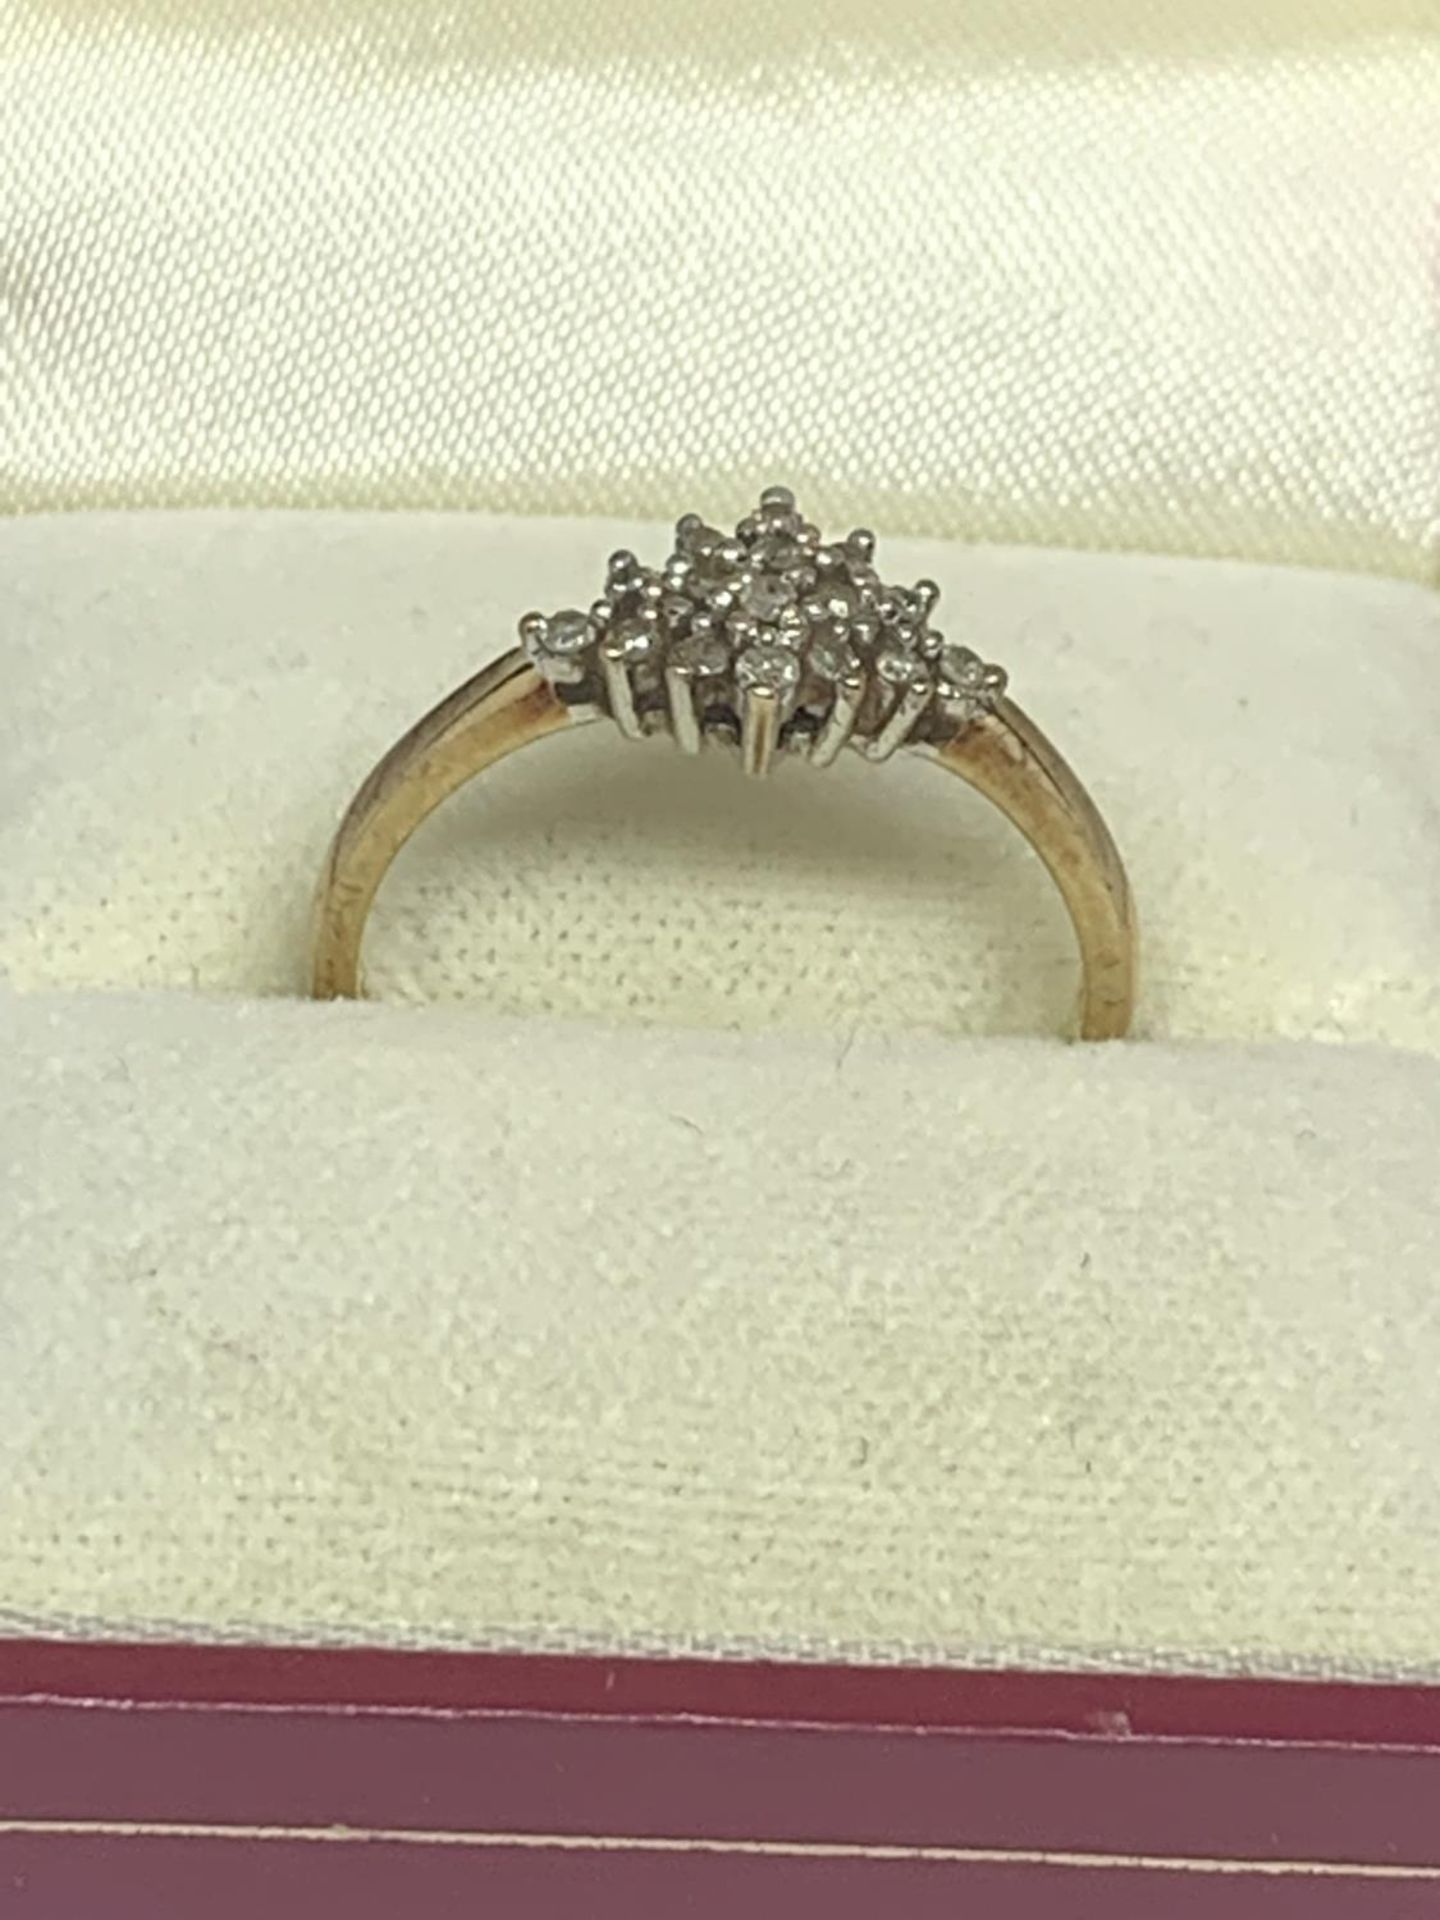 A 9 CARAT GOLD RING WITH DIAMONDS IN A DIAMOND SHAPE DESIGN SIZE 0 WITH PRESENTATION BOX - Image 4 of 5